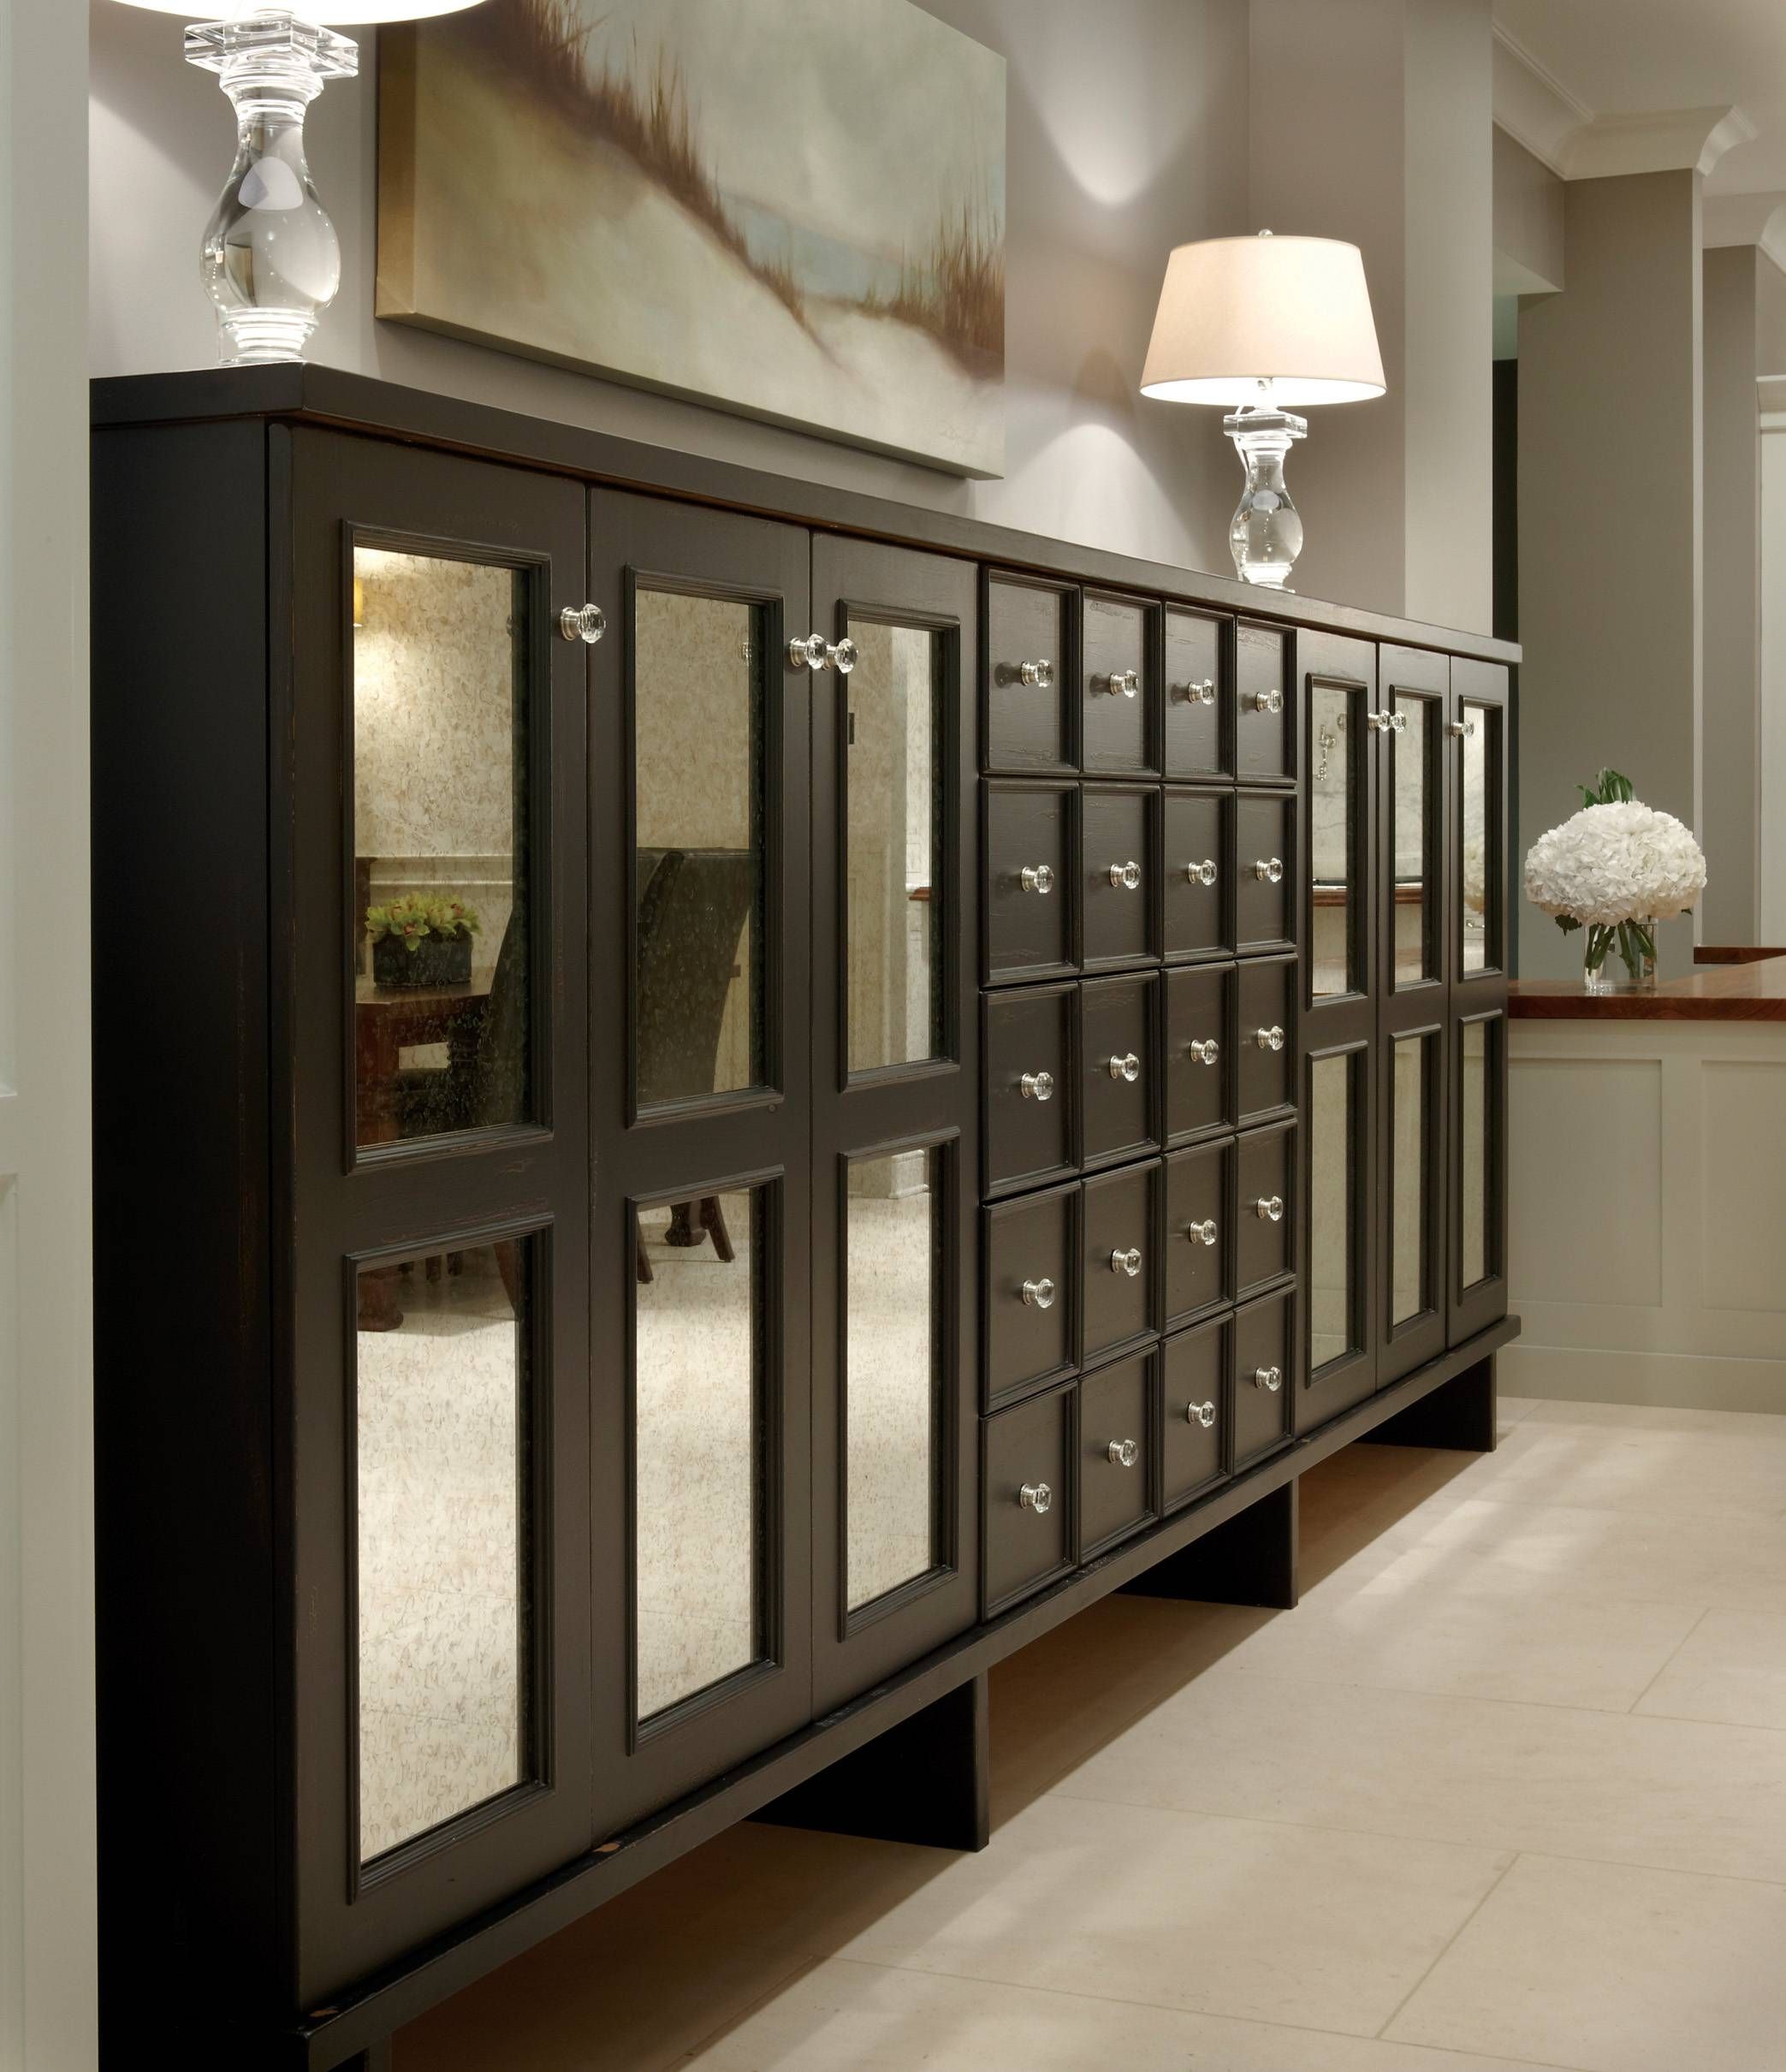 Bedroom : Fluffy About Wardrobes On Pinterest Fitted Alcove Plus Regarding Alcove Wardrobes Designs (View 10 of 30)